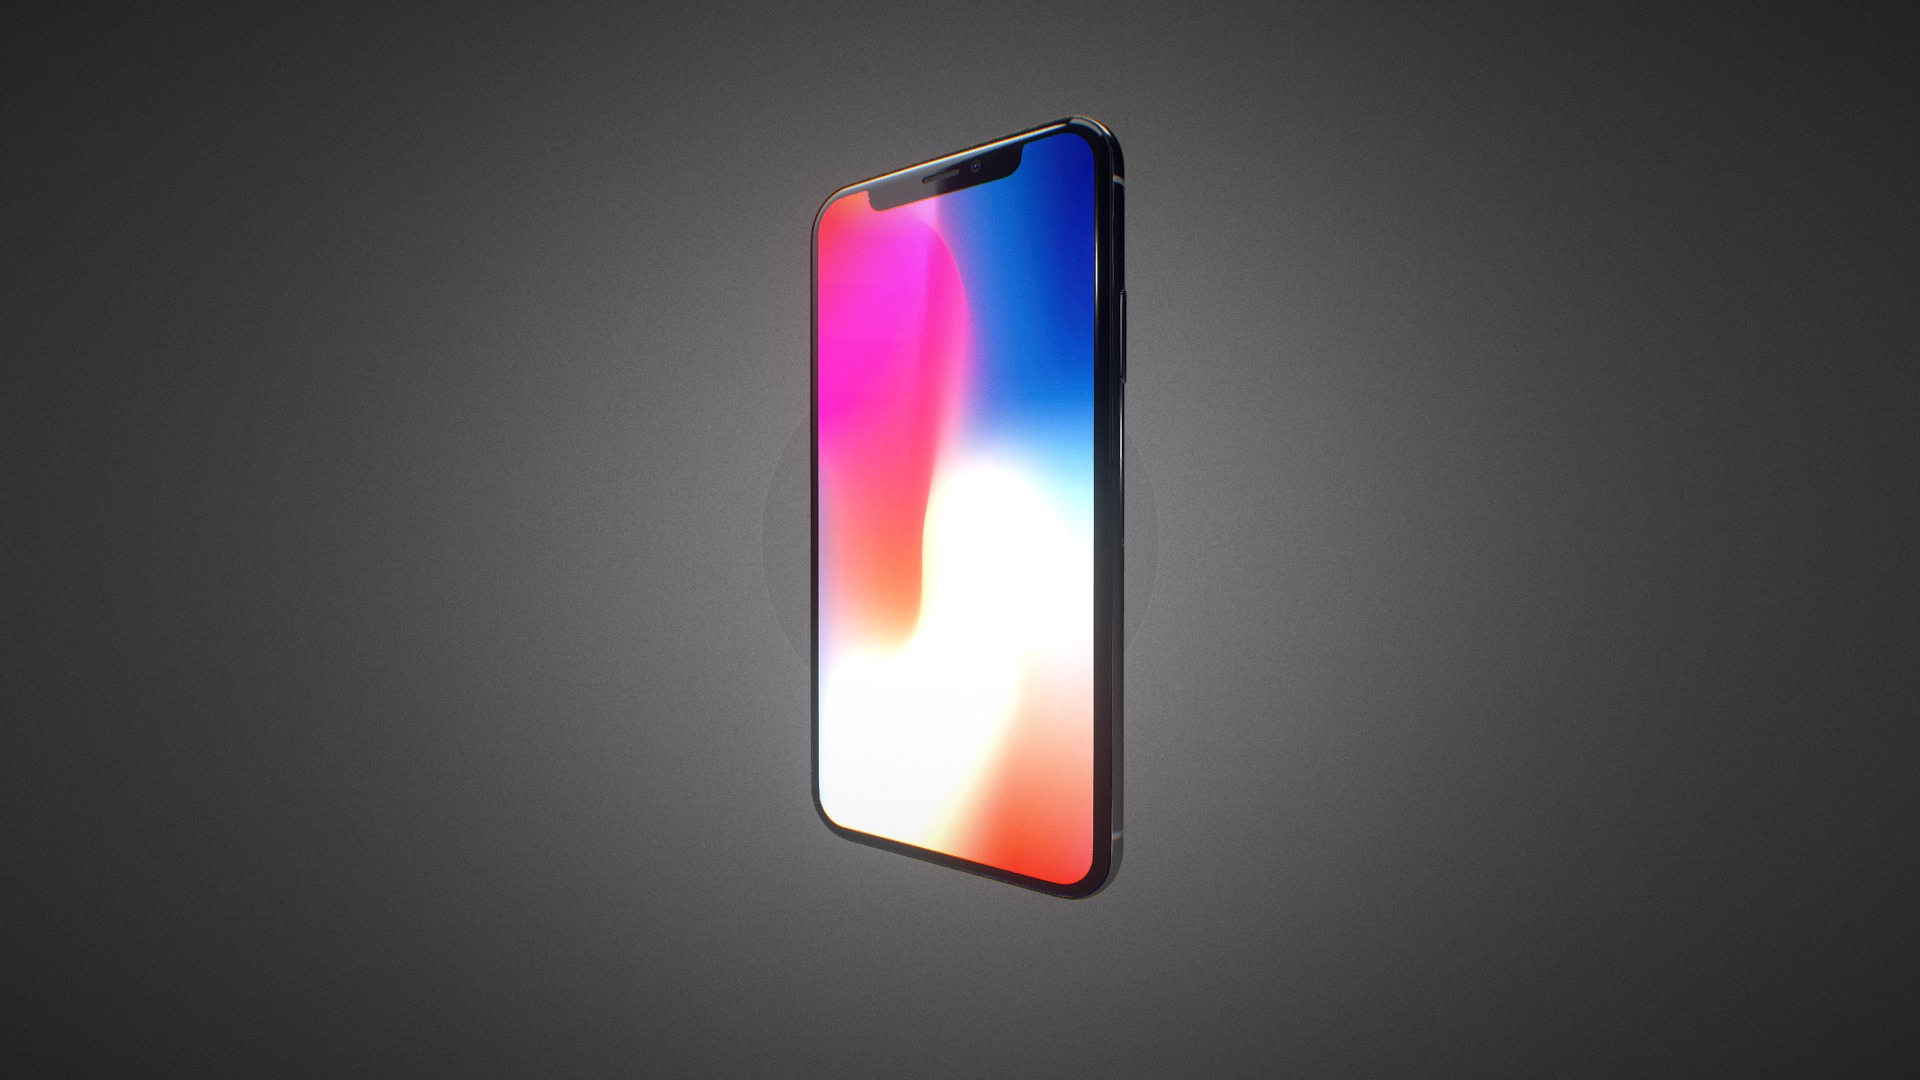 3D model Apple iPhone X for Element 3D - This is a 3D model of the Apple iPhone X for Element 3D. The 3D model is about a cell phone with a colorful light.